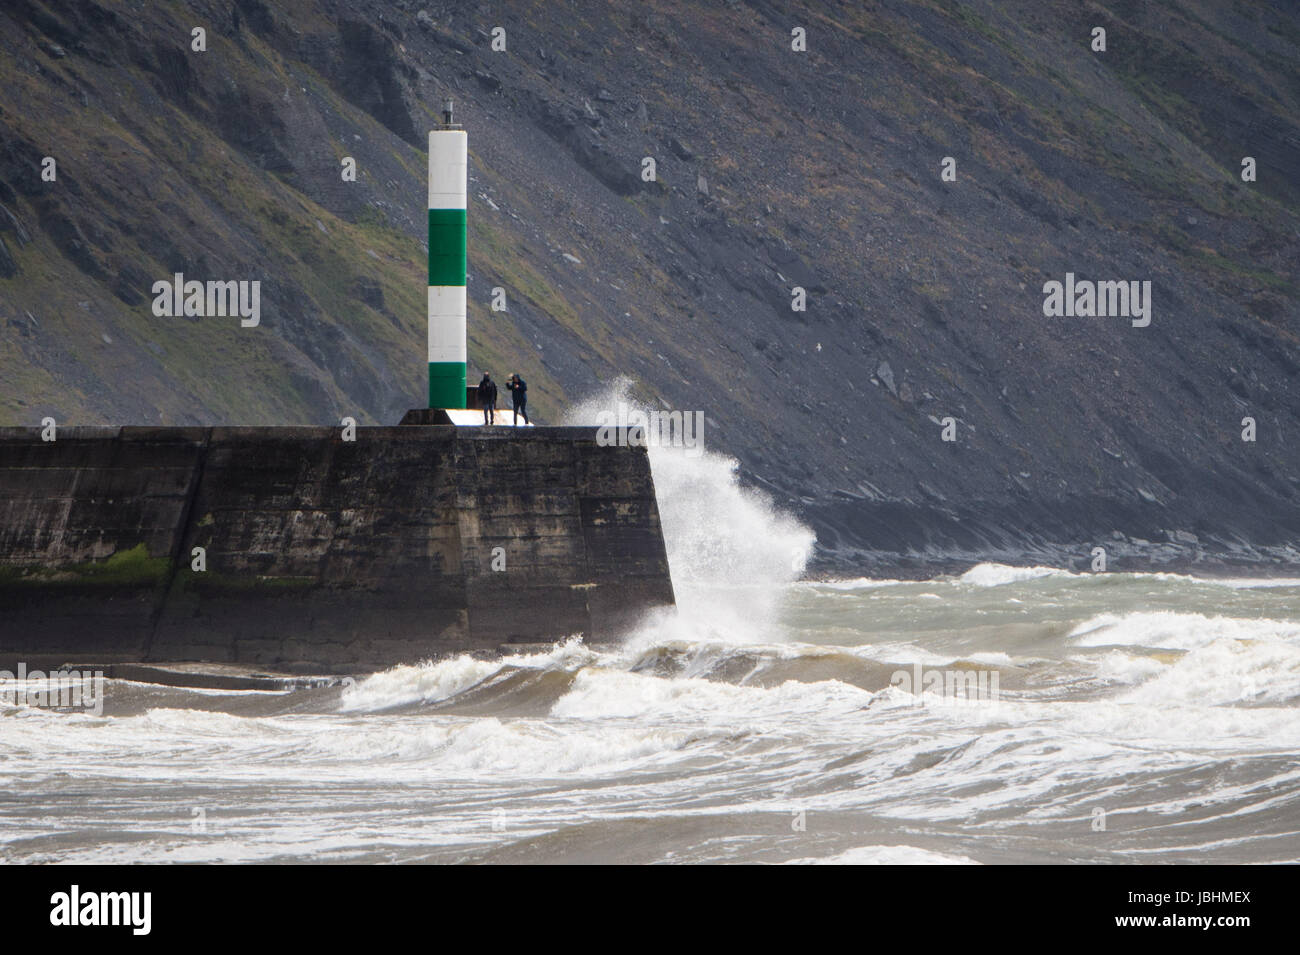 Aberystwyth Wales UK, Sunday 11 June 2017  UK Weather: Two people standing on the harbour wall as waves crash around them on a blustery summer sunday afternoon in Aberystwyth  on the Cardigan Bay coast of west  Wales  Photo credit: Keith Morris / ALAMY Live News Stock Photo